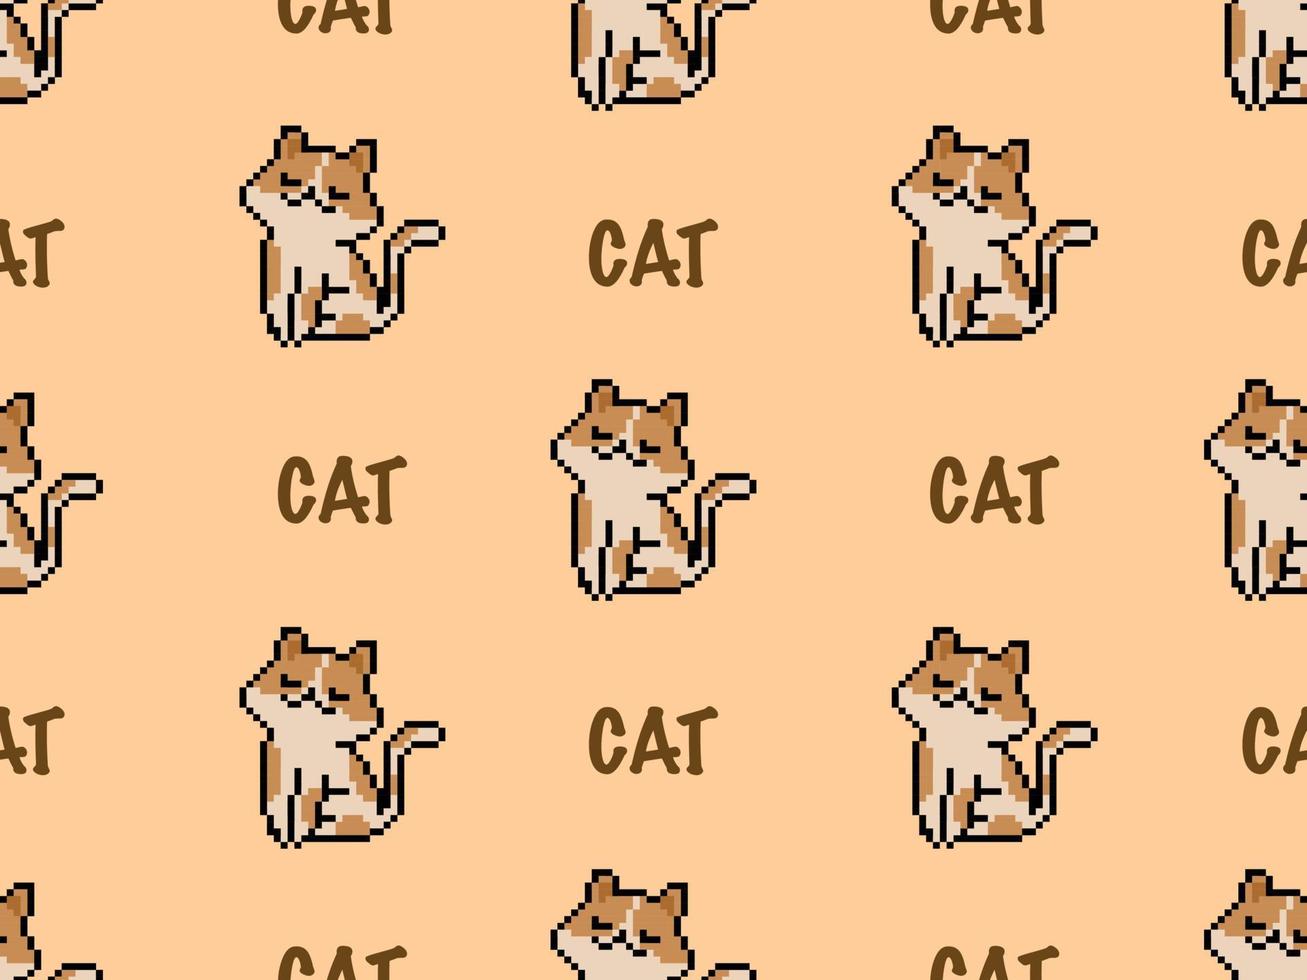 Cat cartoon character seamless pattern on brown background.Pixel style vector